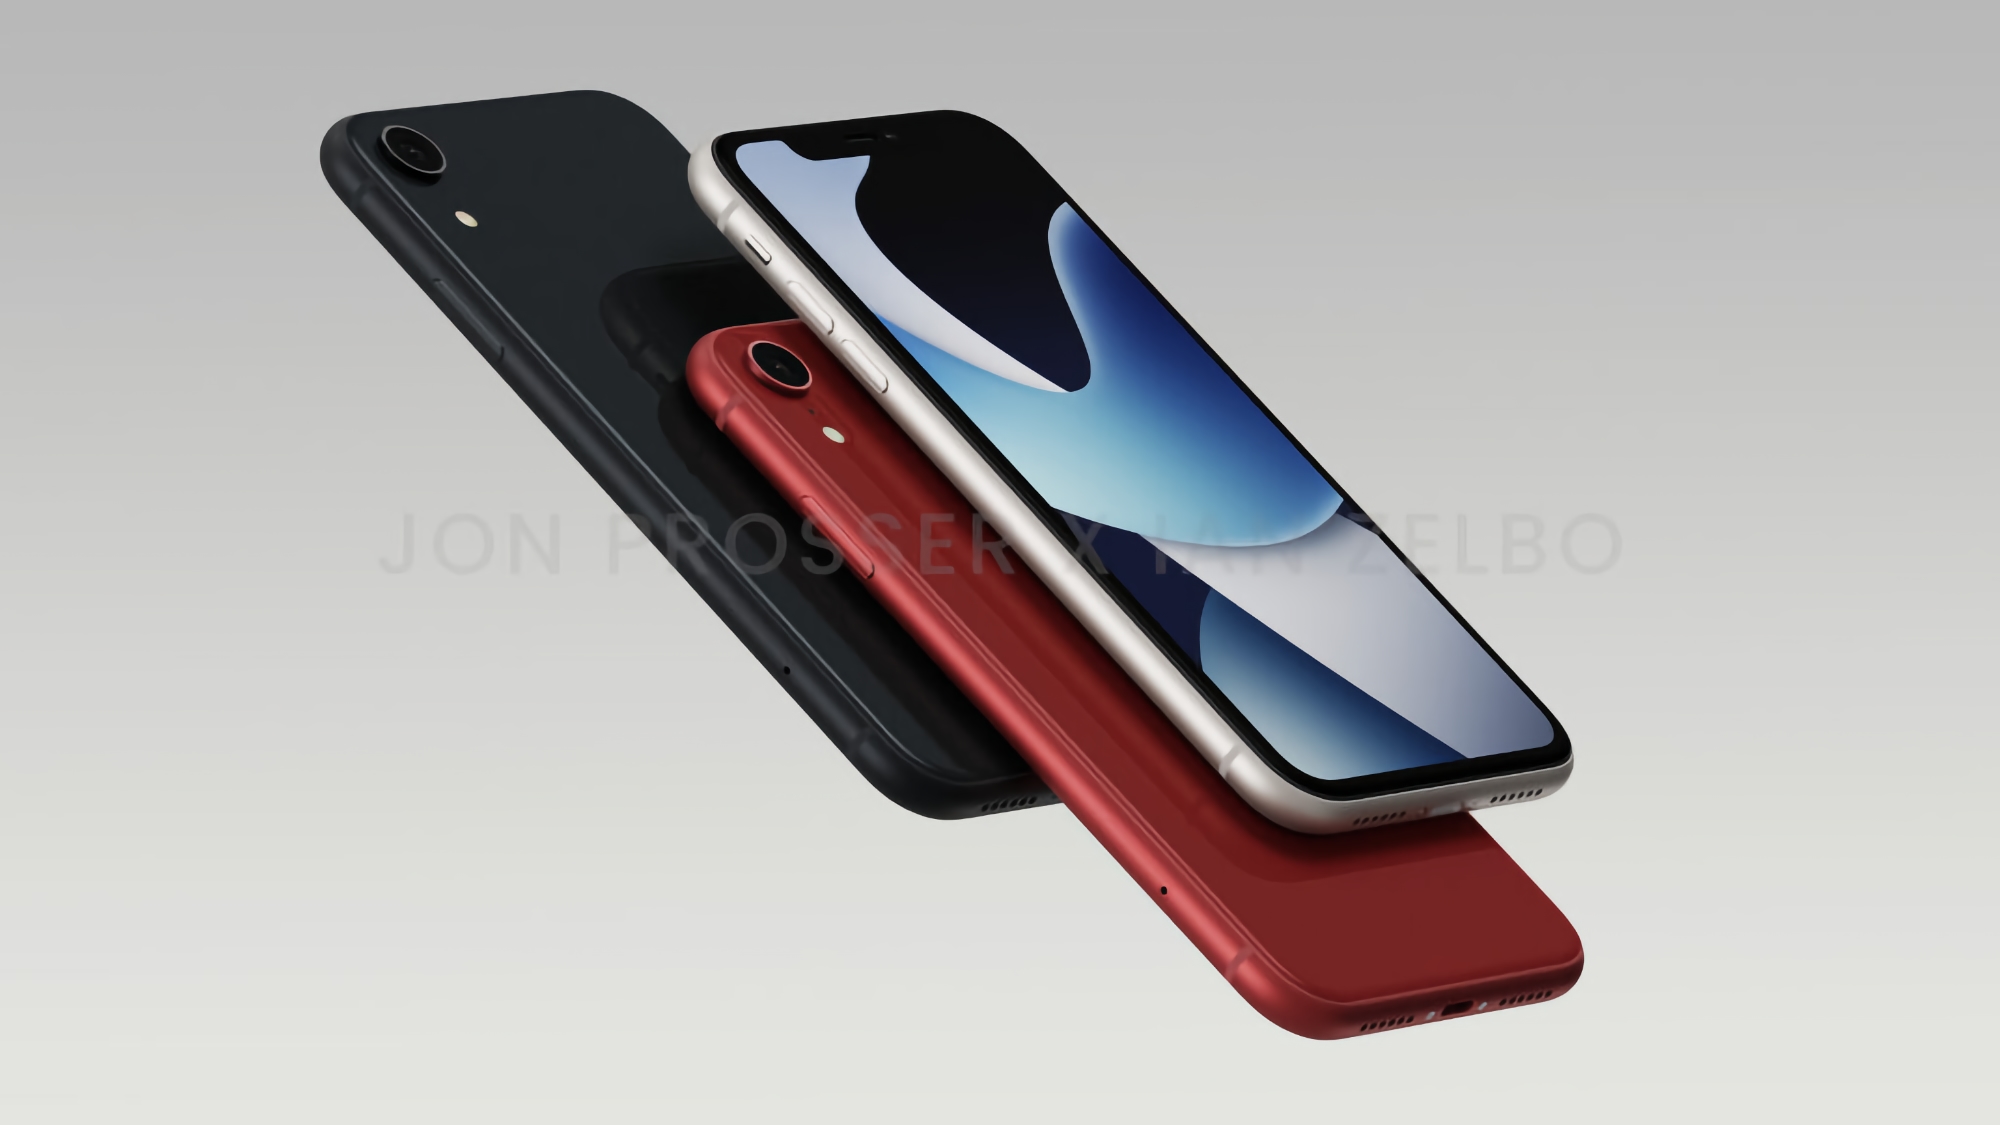 A copy of the iPhone XR: insider John Prosser showed what the iPhone SE 4th generation will look like